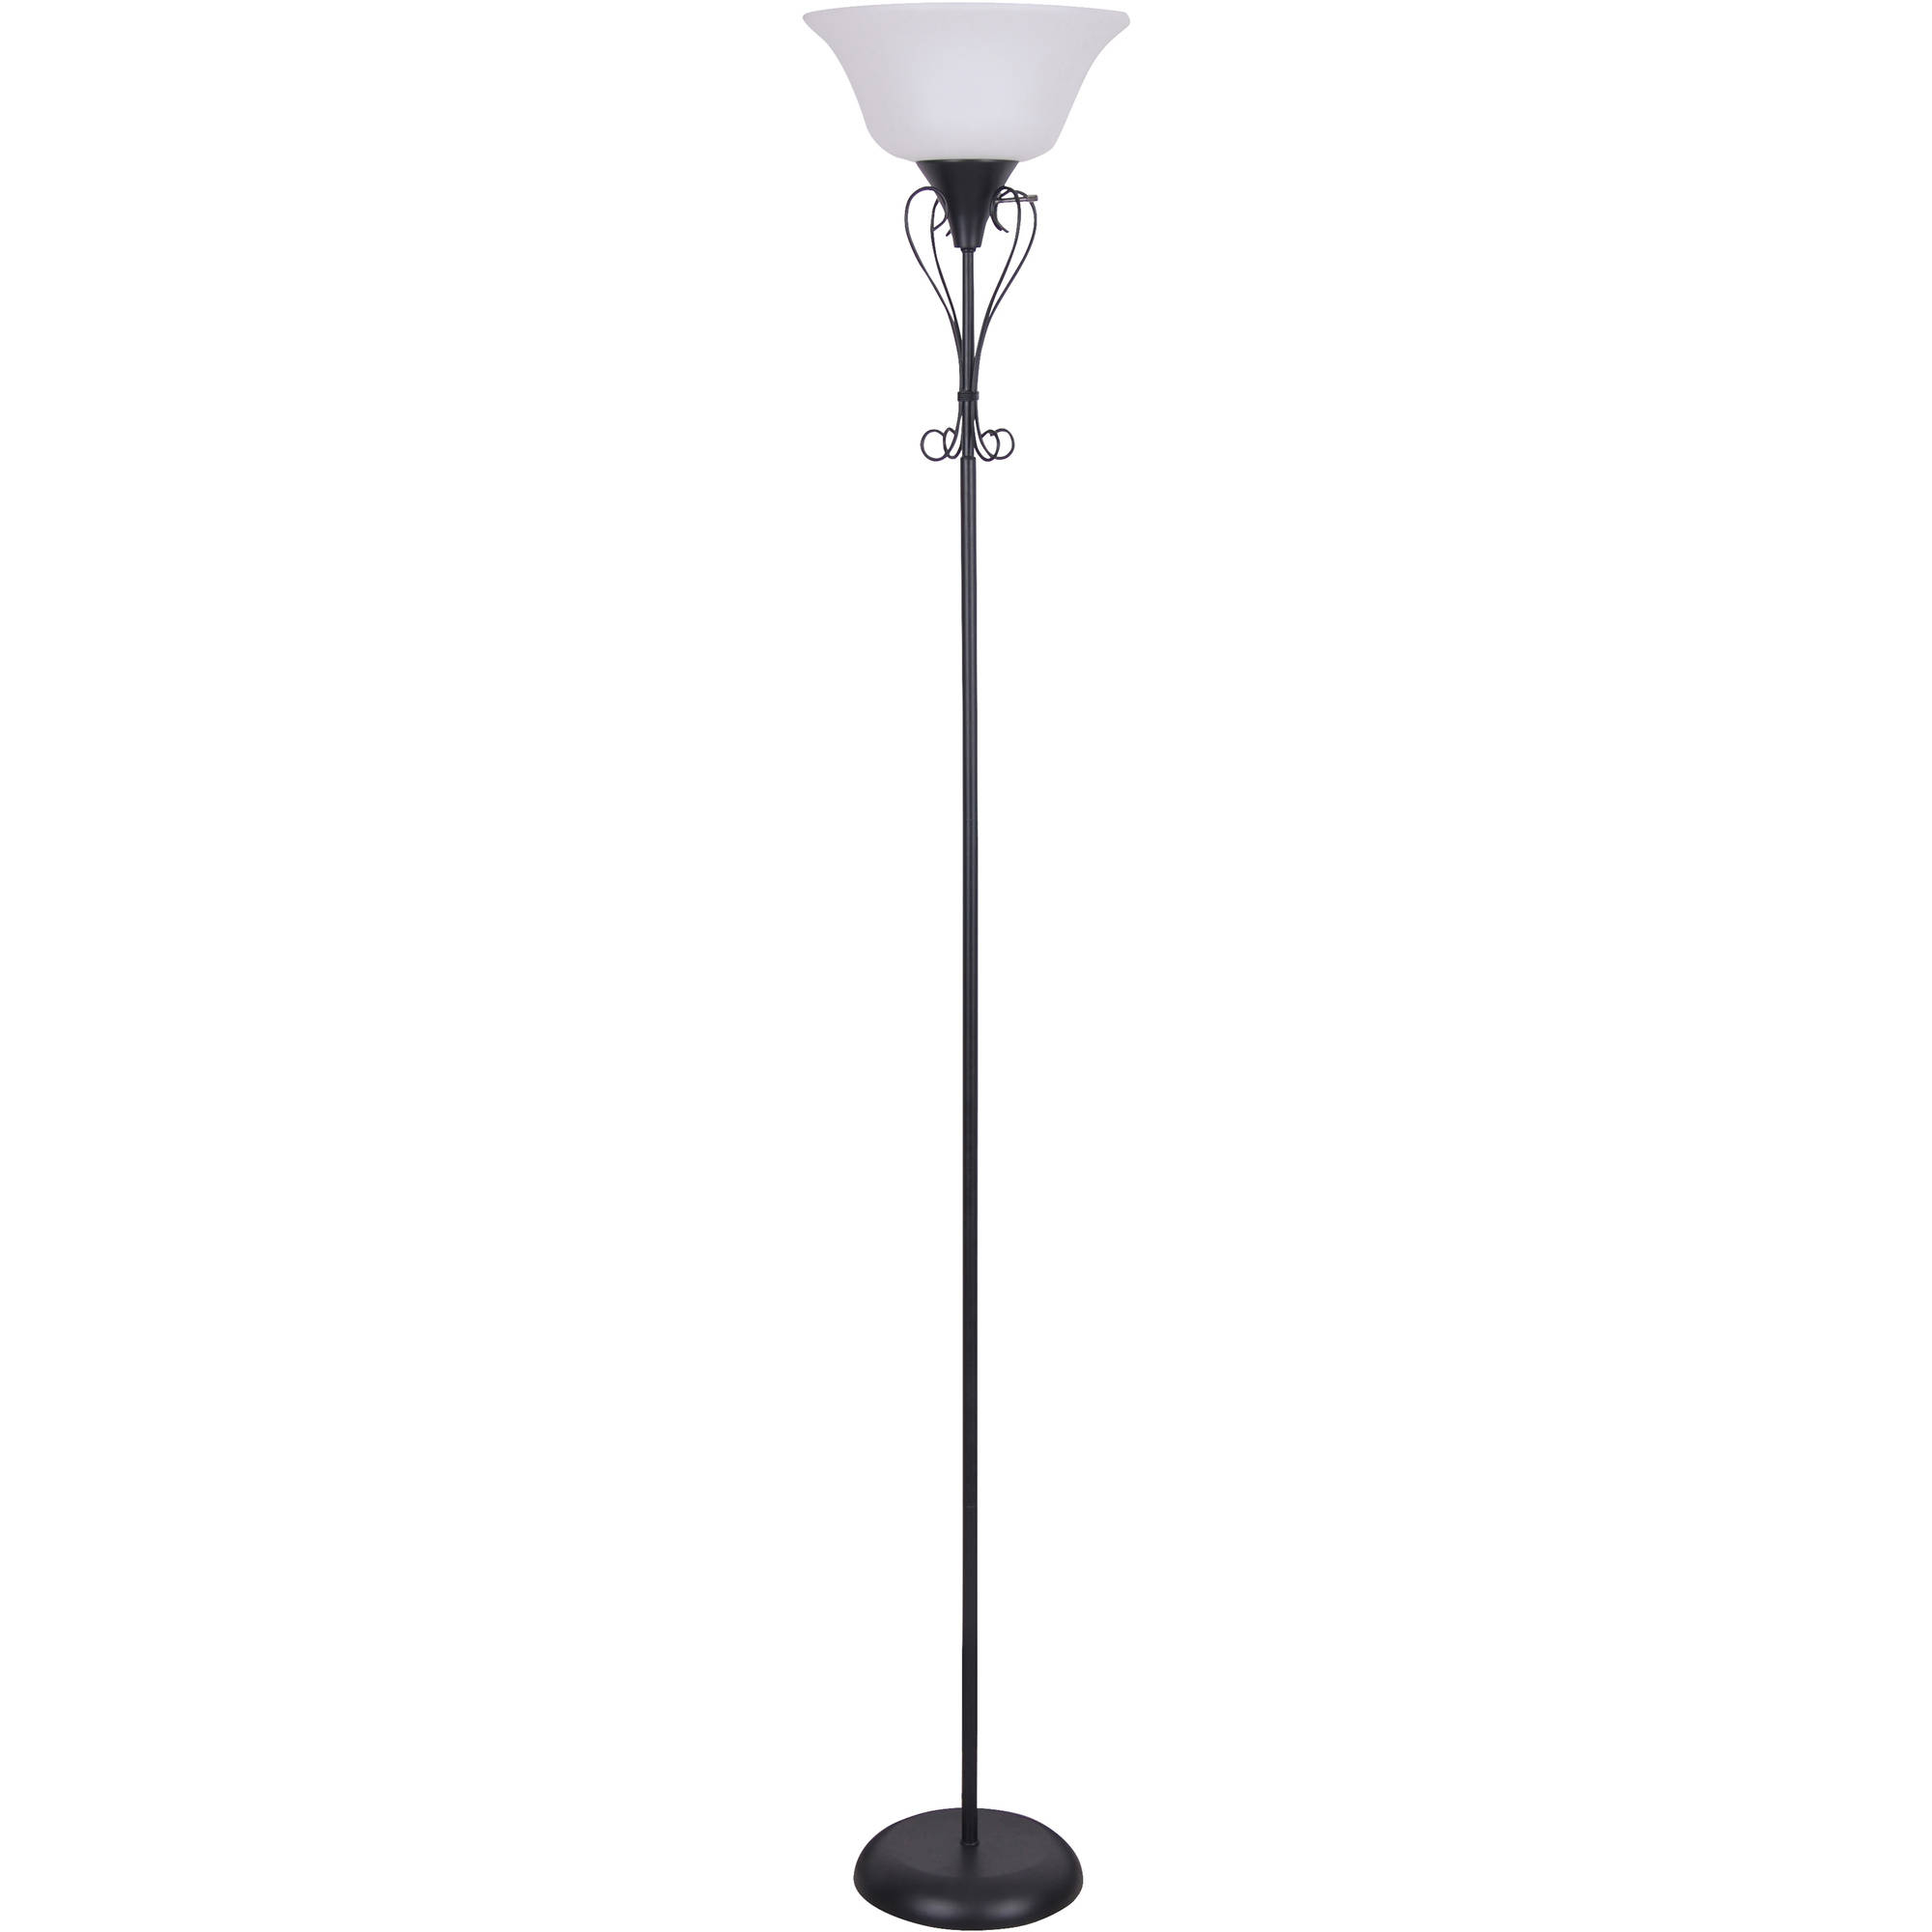 Mainstays 71 Scroll Torchiere Floor Lamp Black Finish Walmart with regard to proportions 2000 X 2000